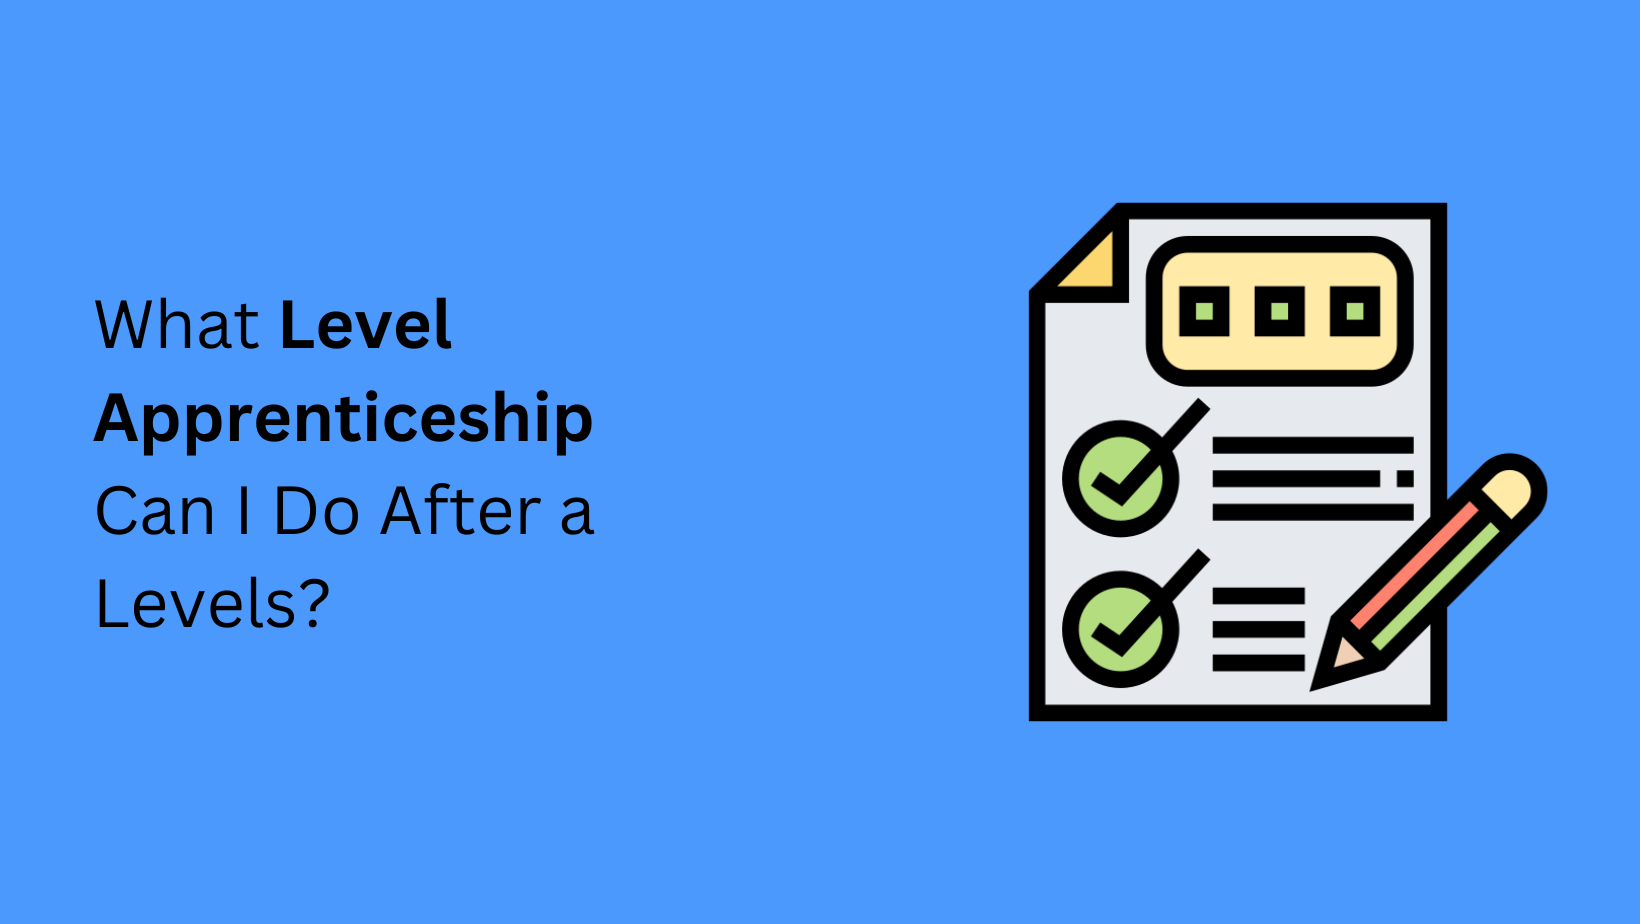 What Level Apprenticeship Can I Do After a Levels